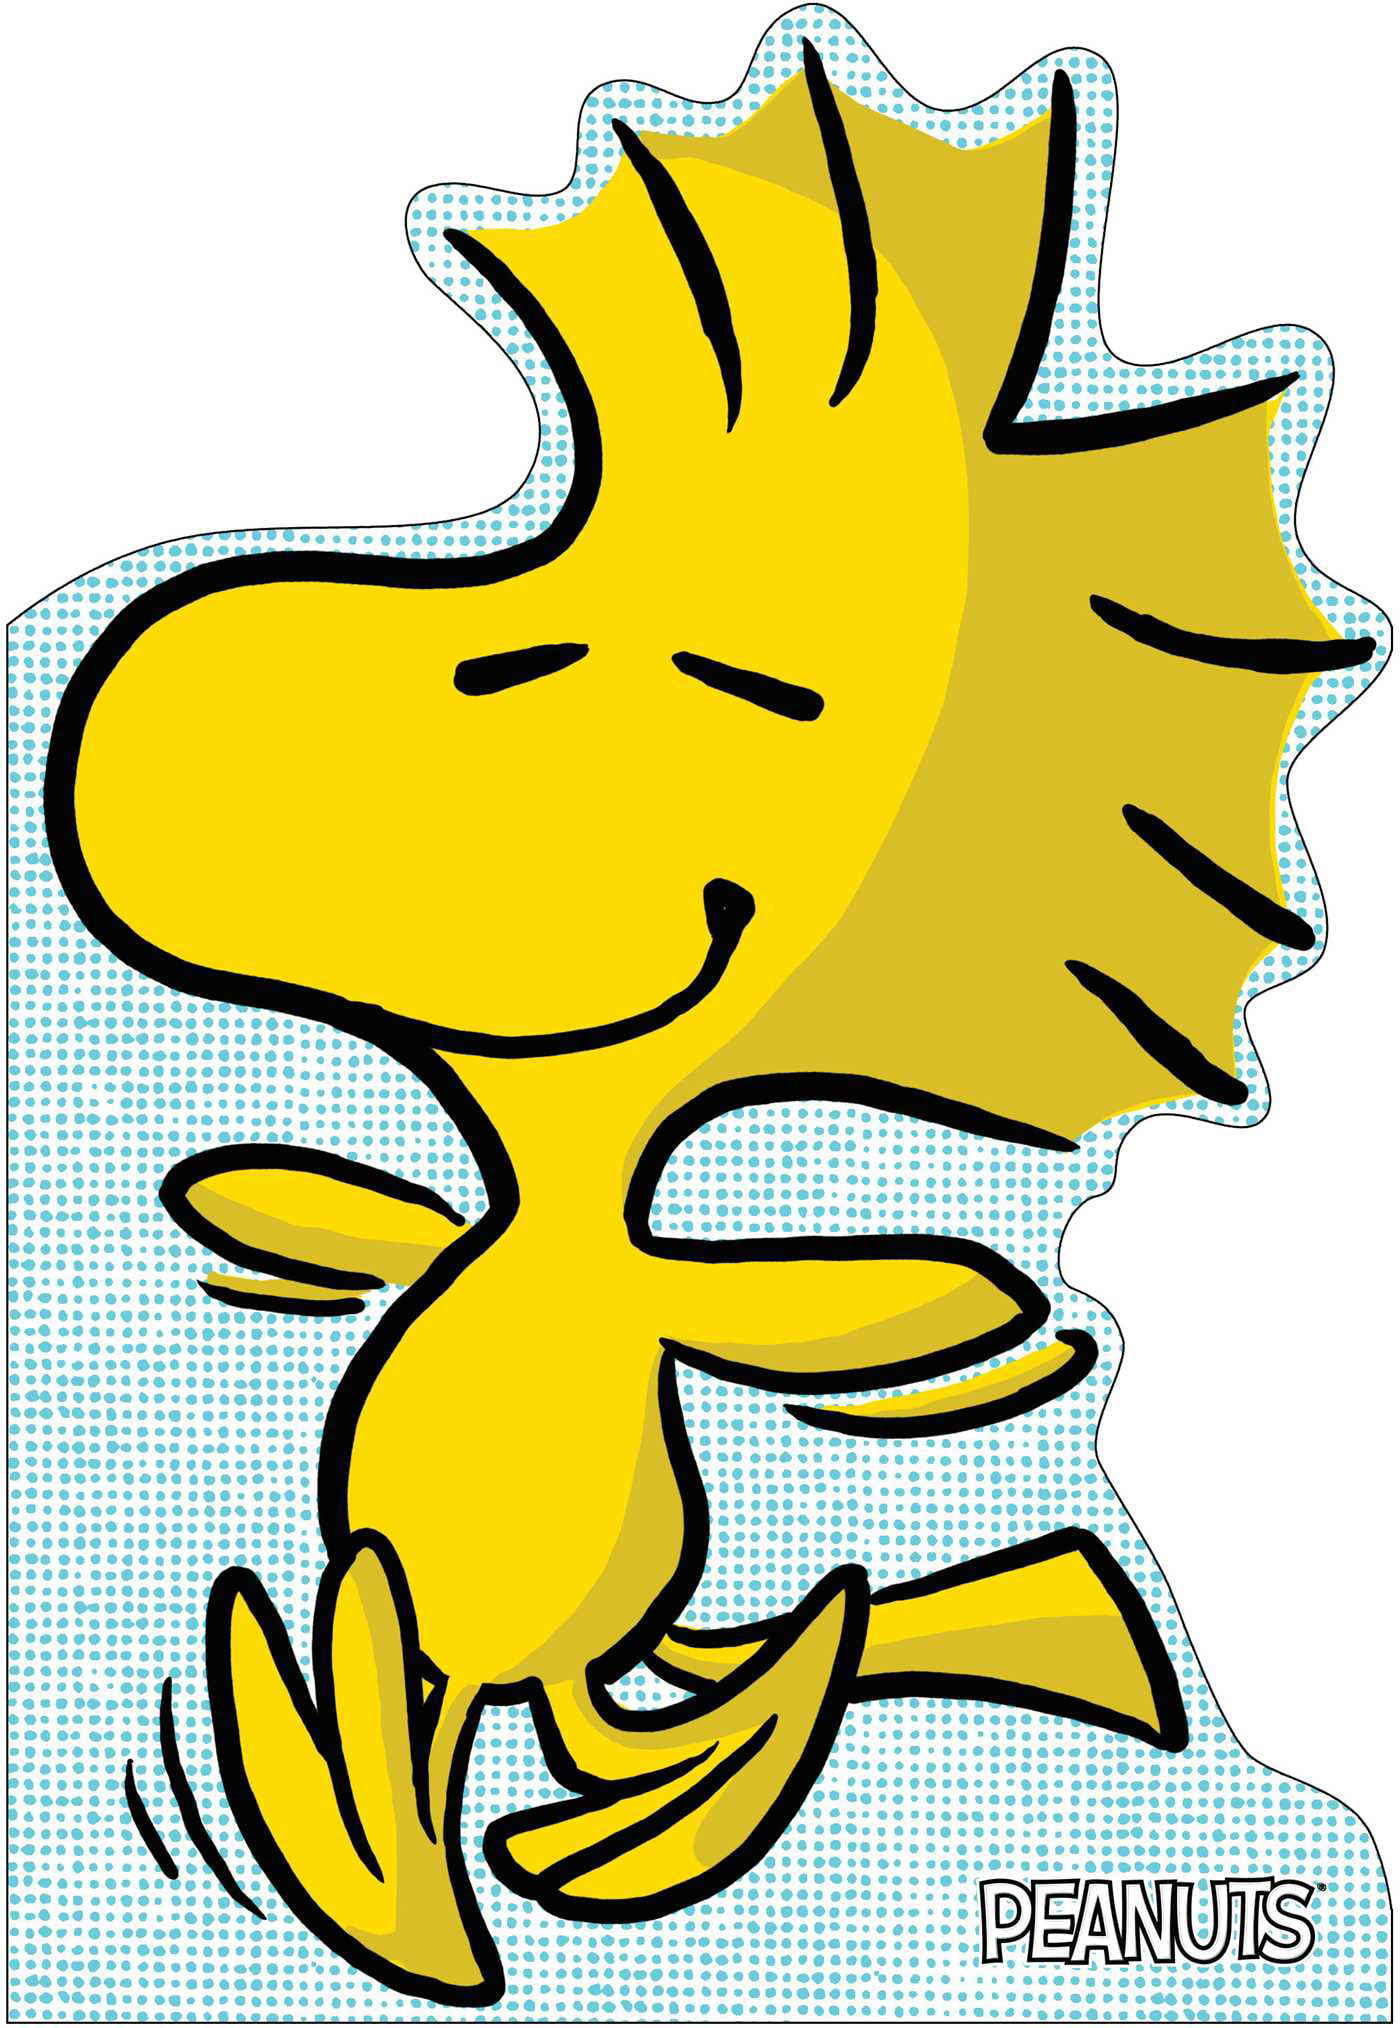 A Best Friend for Woodstock (Part of Peanuts) By Charles M. Schulz and